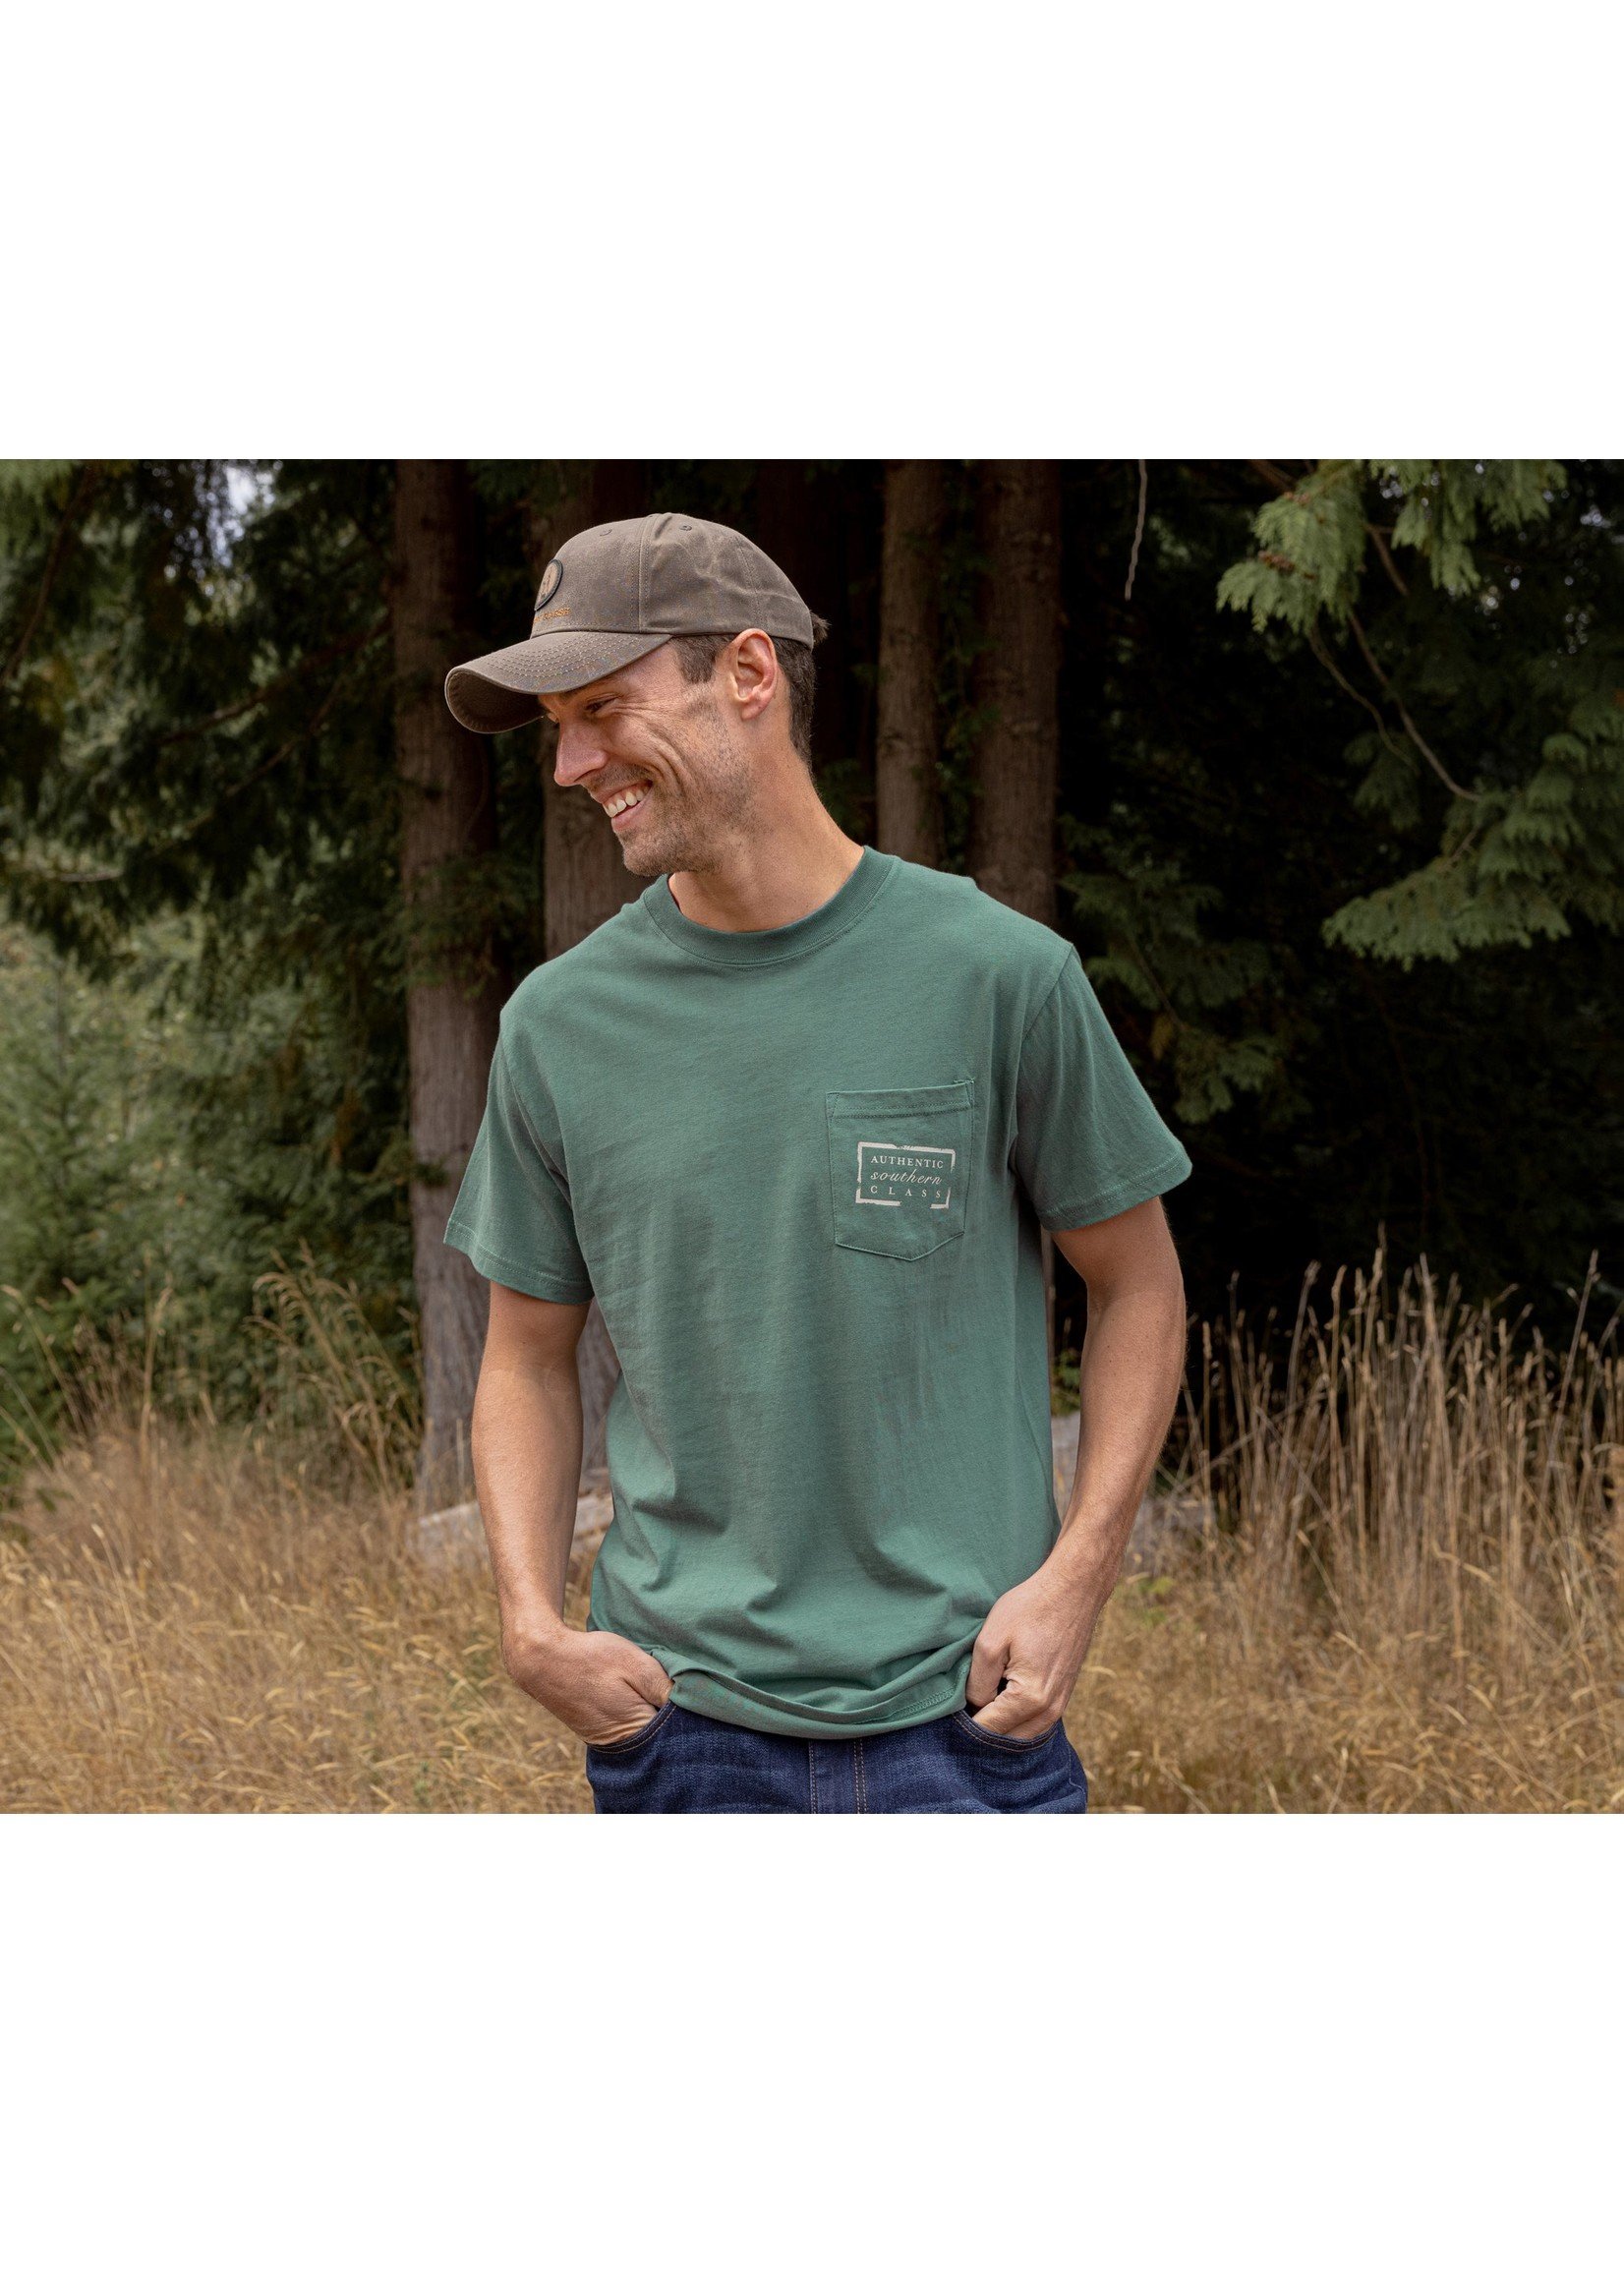 Southern Marsh Authentic Tee